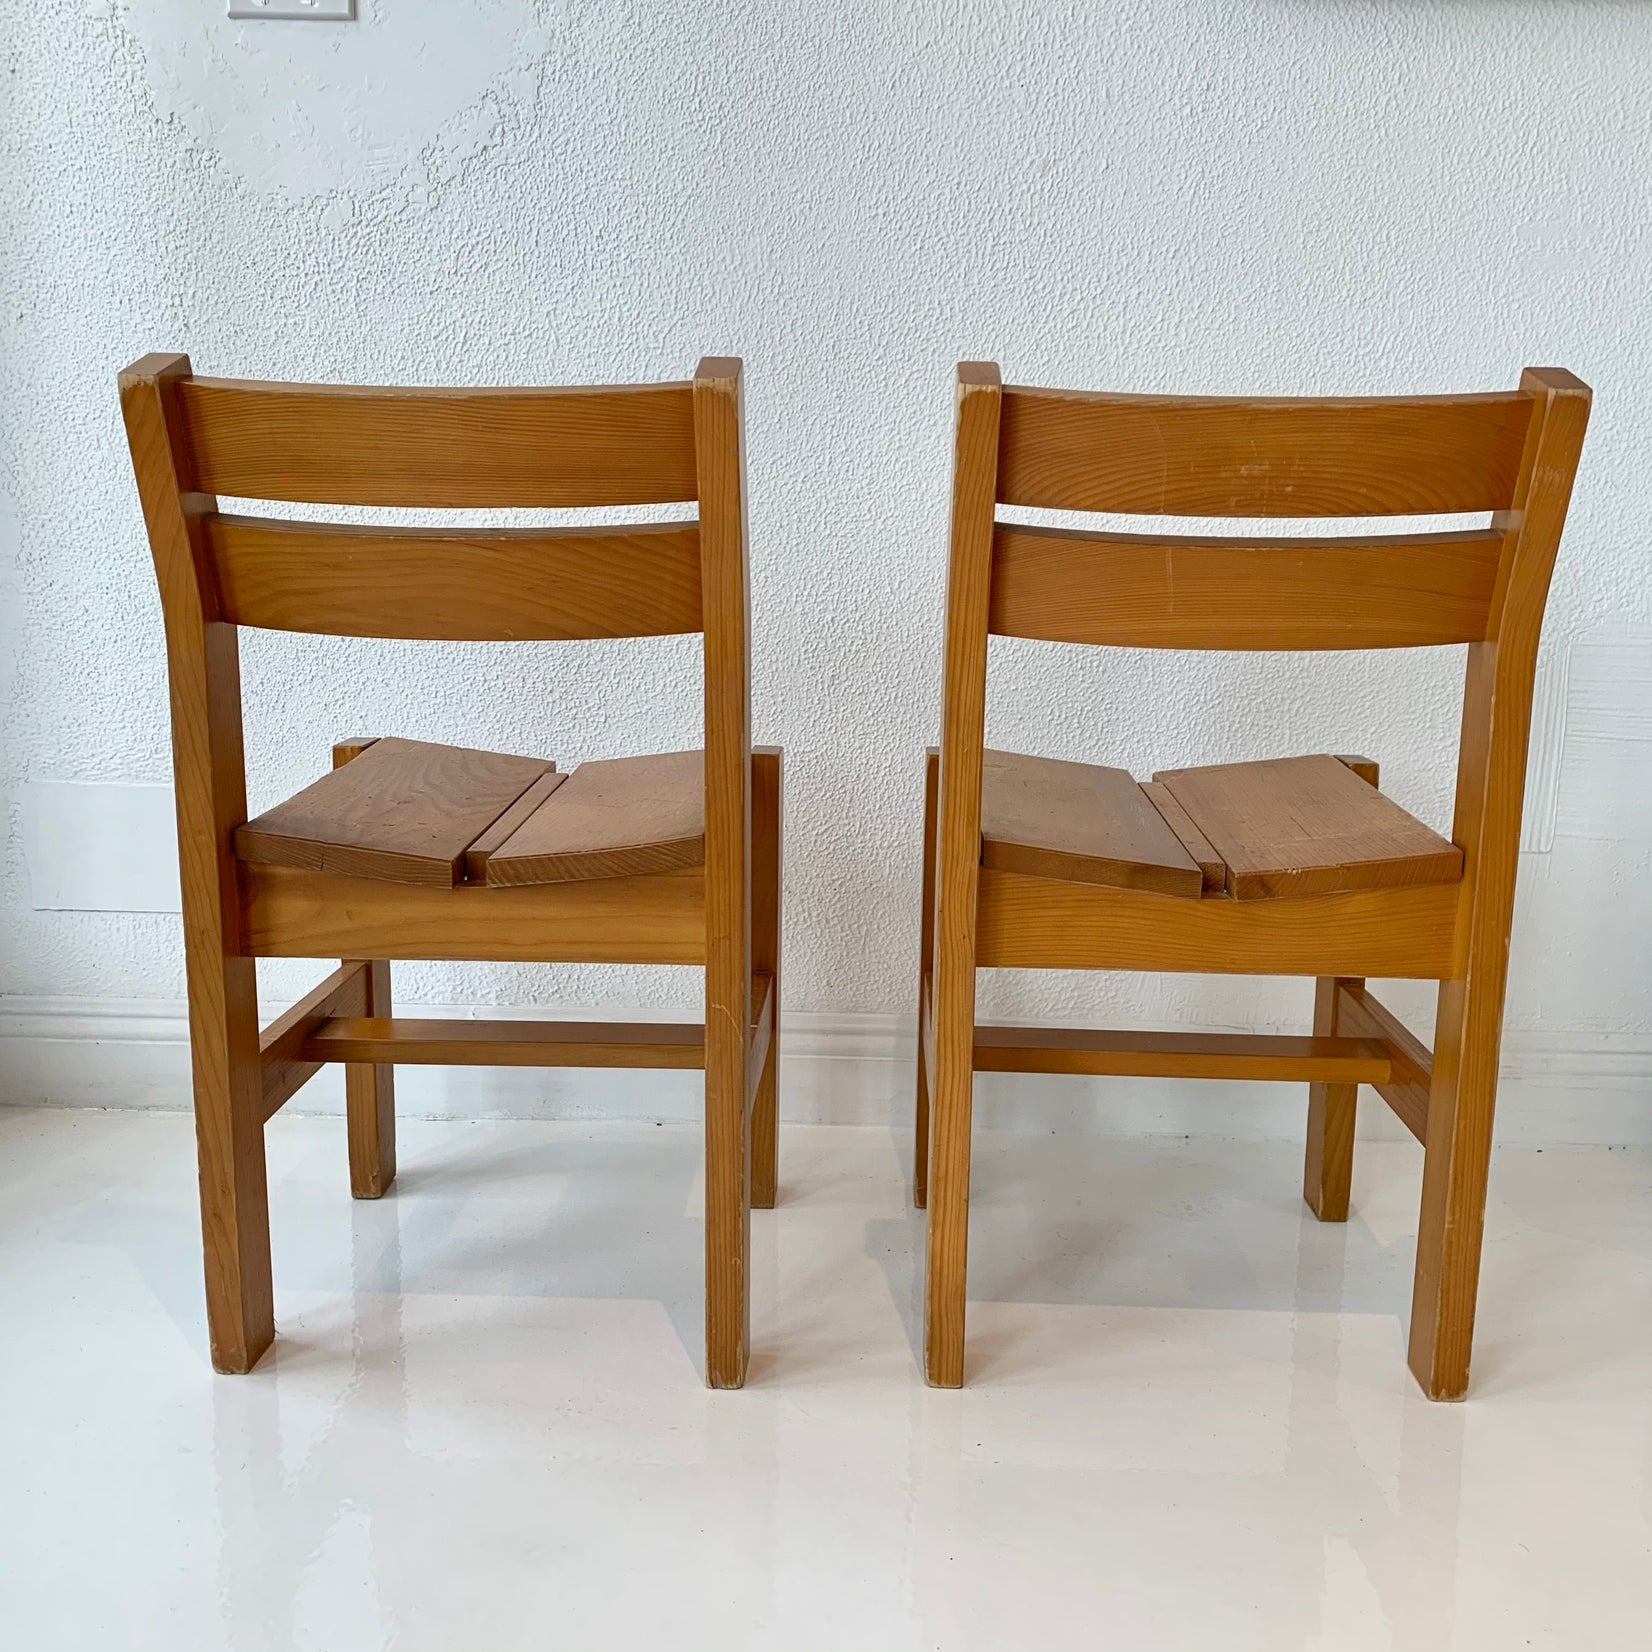 Charlotte Perriand Chairs from "La Cascade" at Les Arcs, 1600, 1960s France